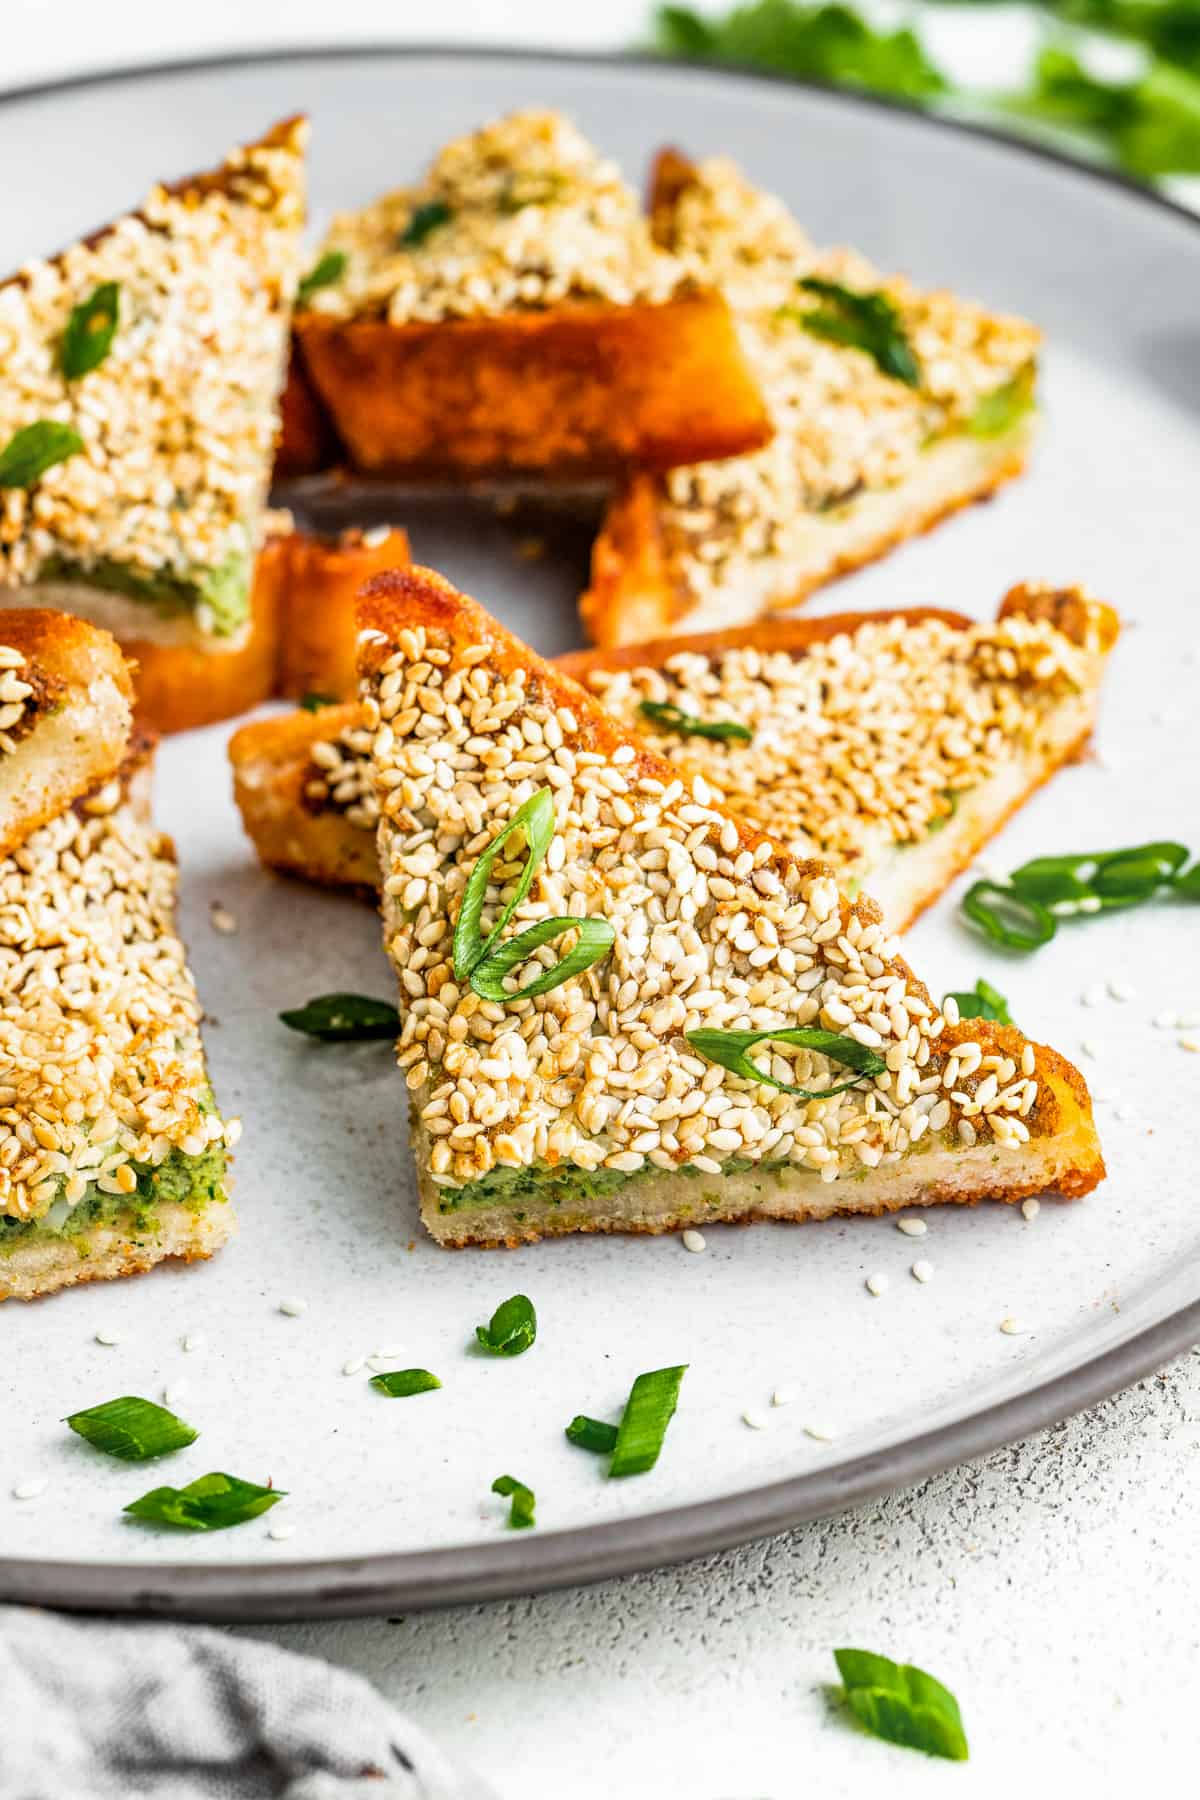 Shrimp toast arranged on a plate and garnished with sliced green onions.